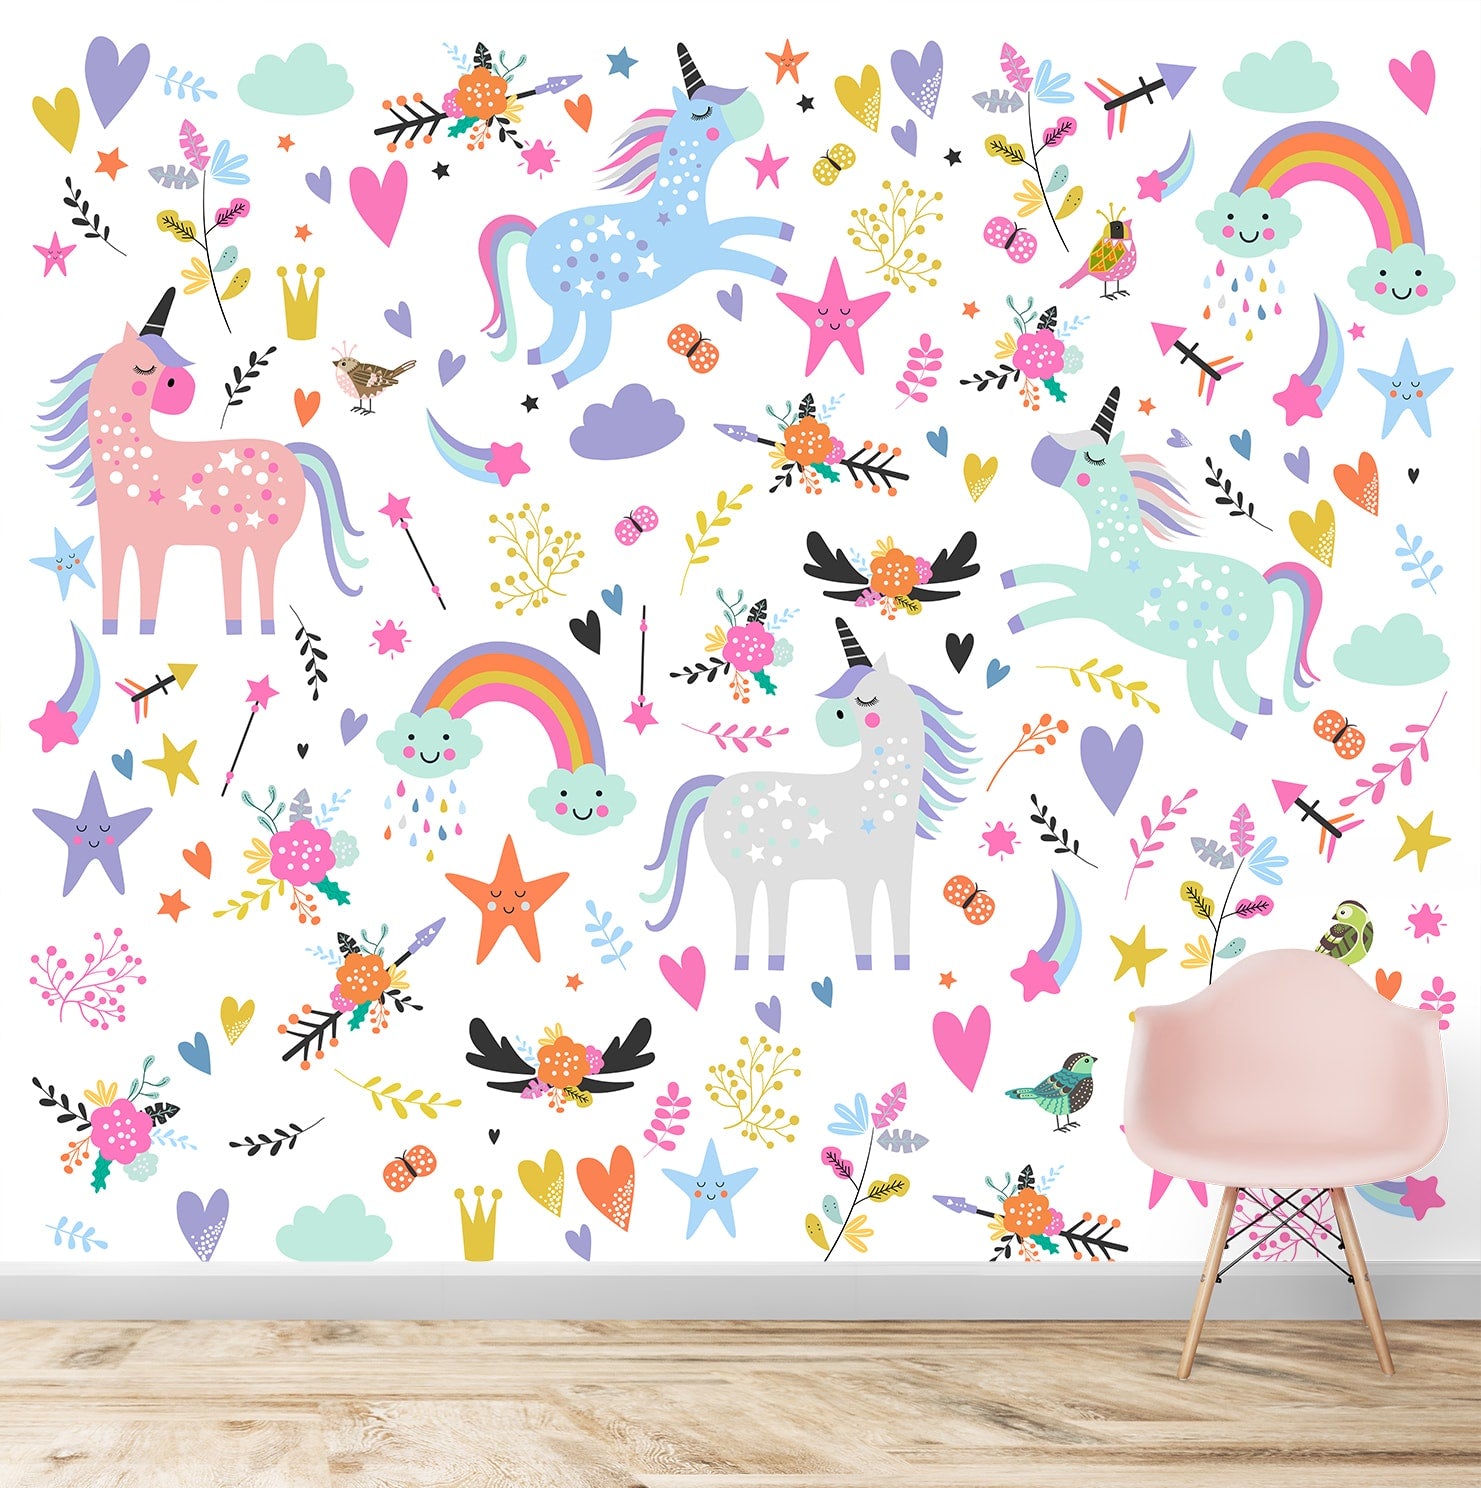 Colour-in Unicorn Wall Sticker Pack